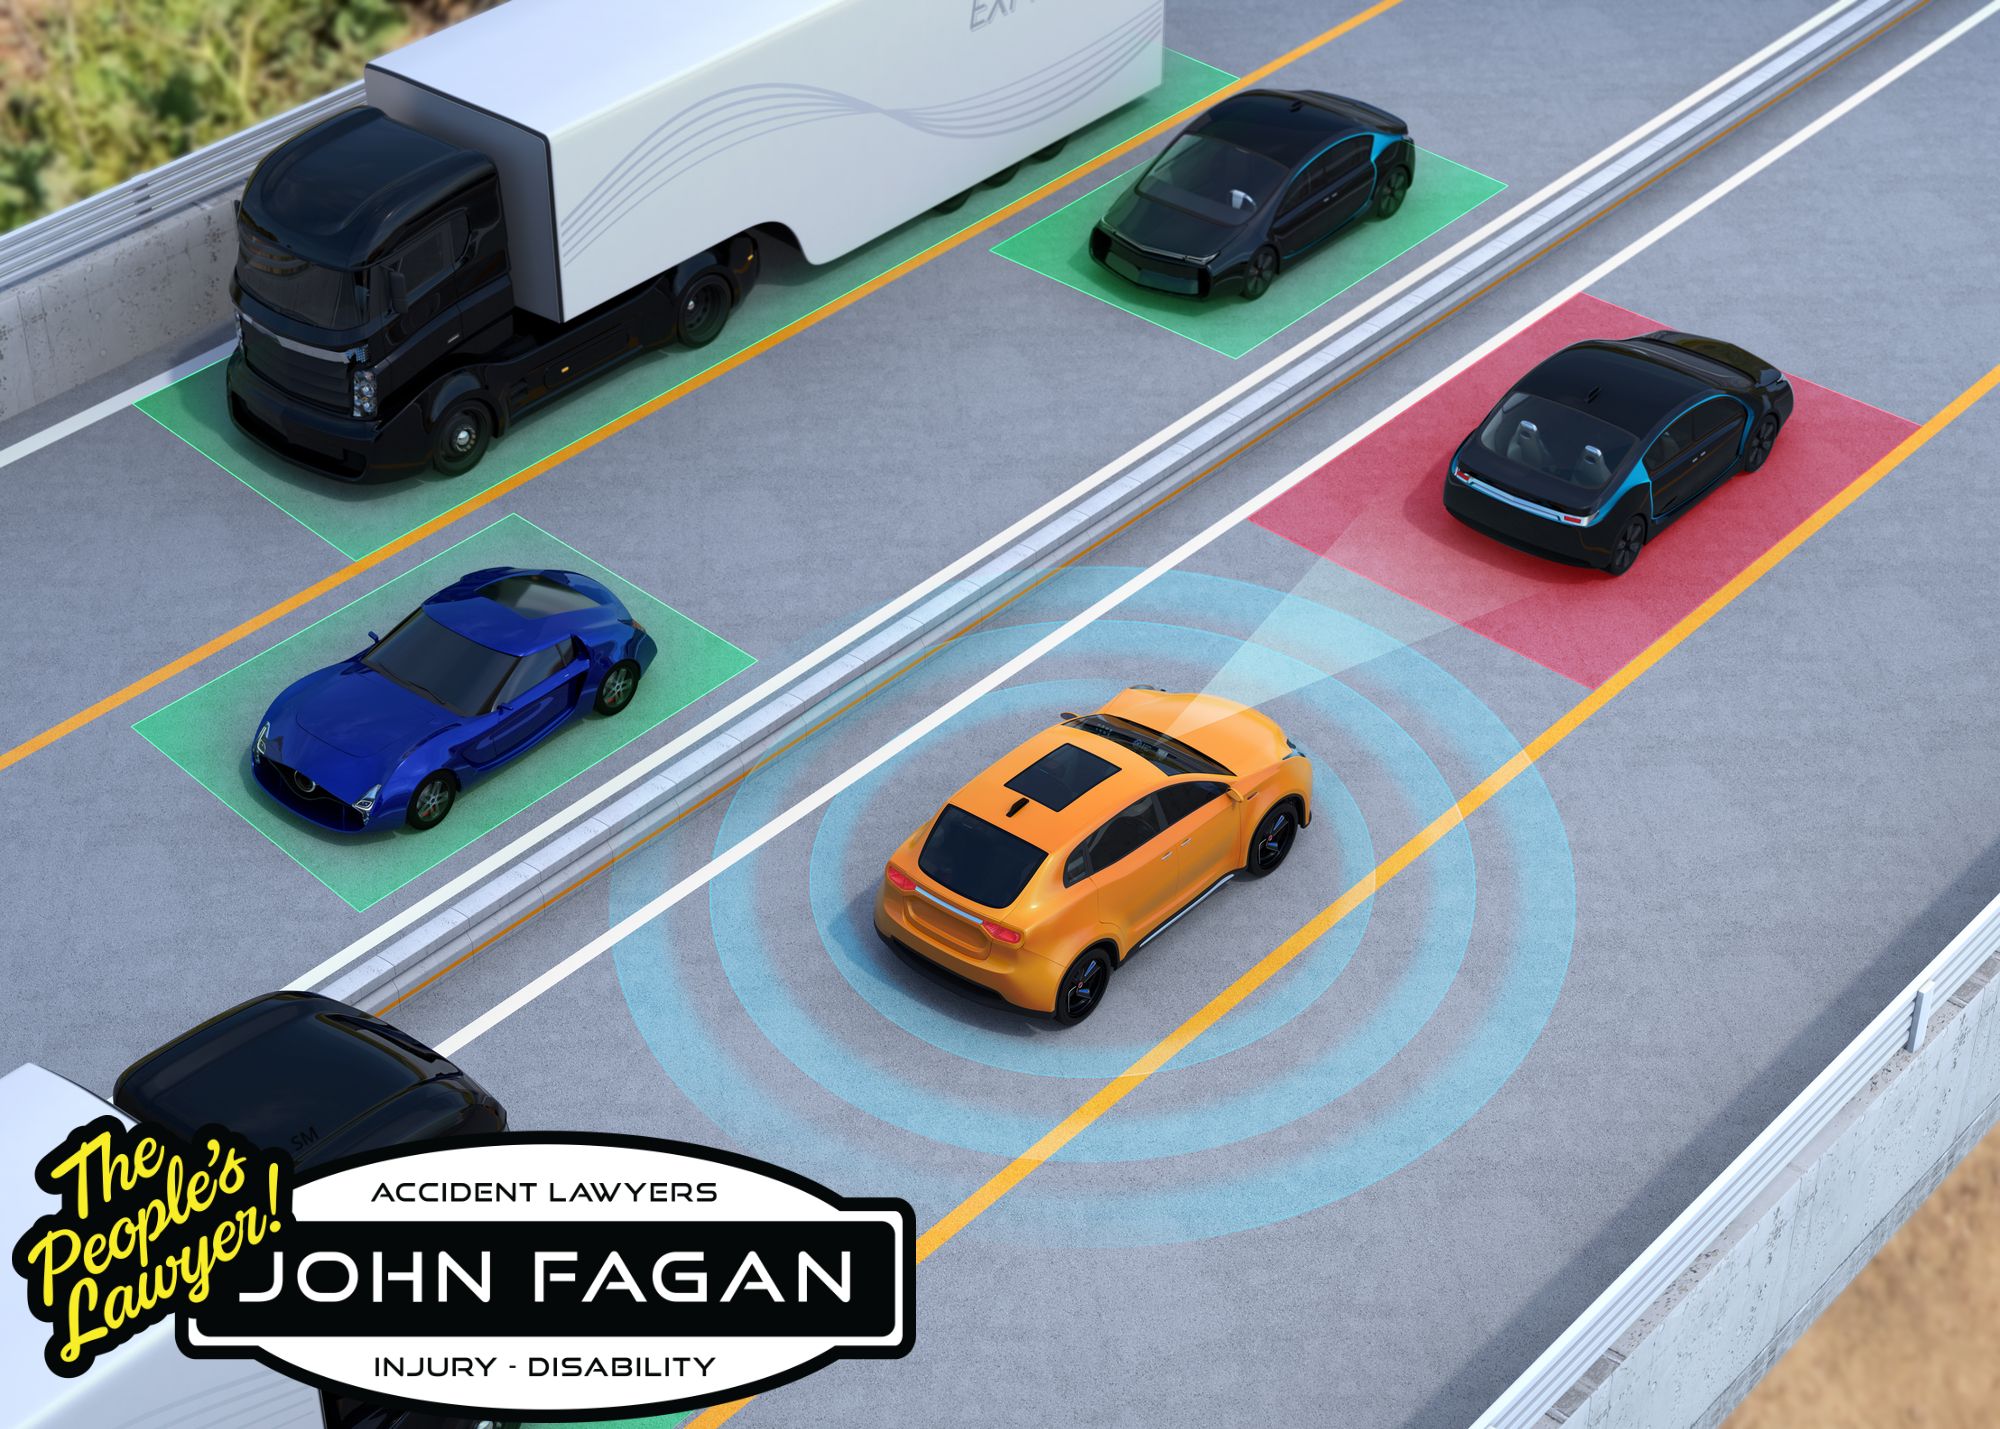 Who is at fault – The self driving car maker or the operator? By John Fagan Self driving cars have been tested since 2005